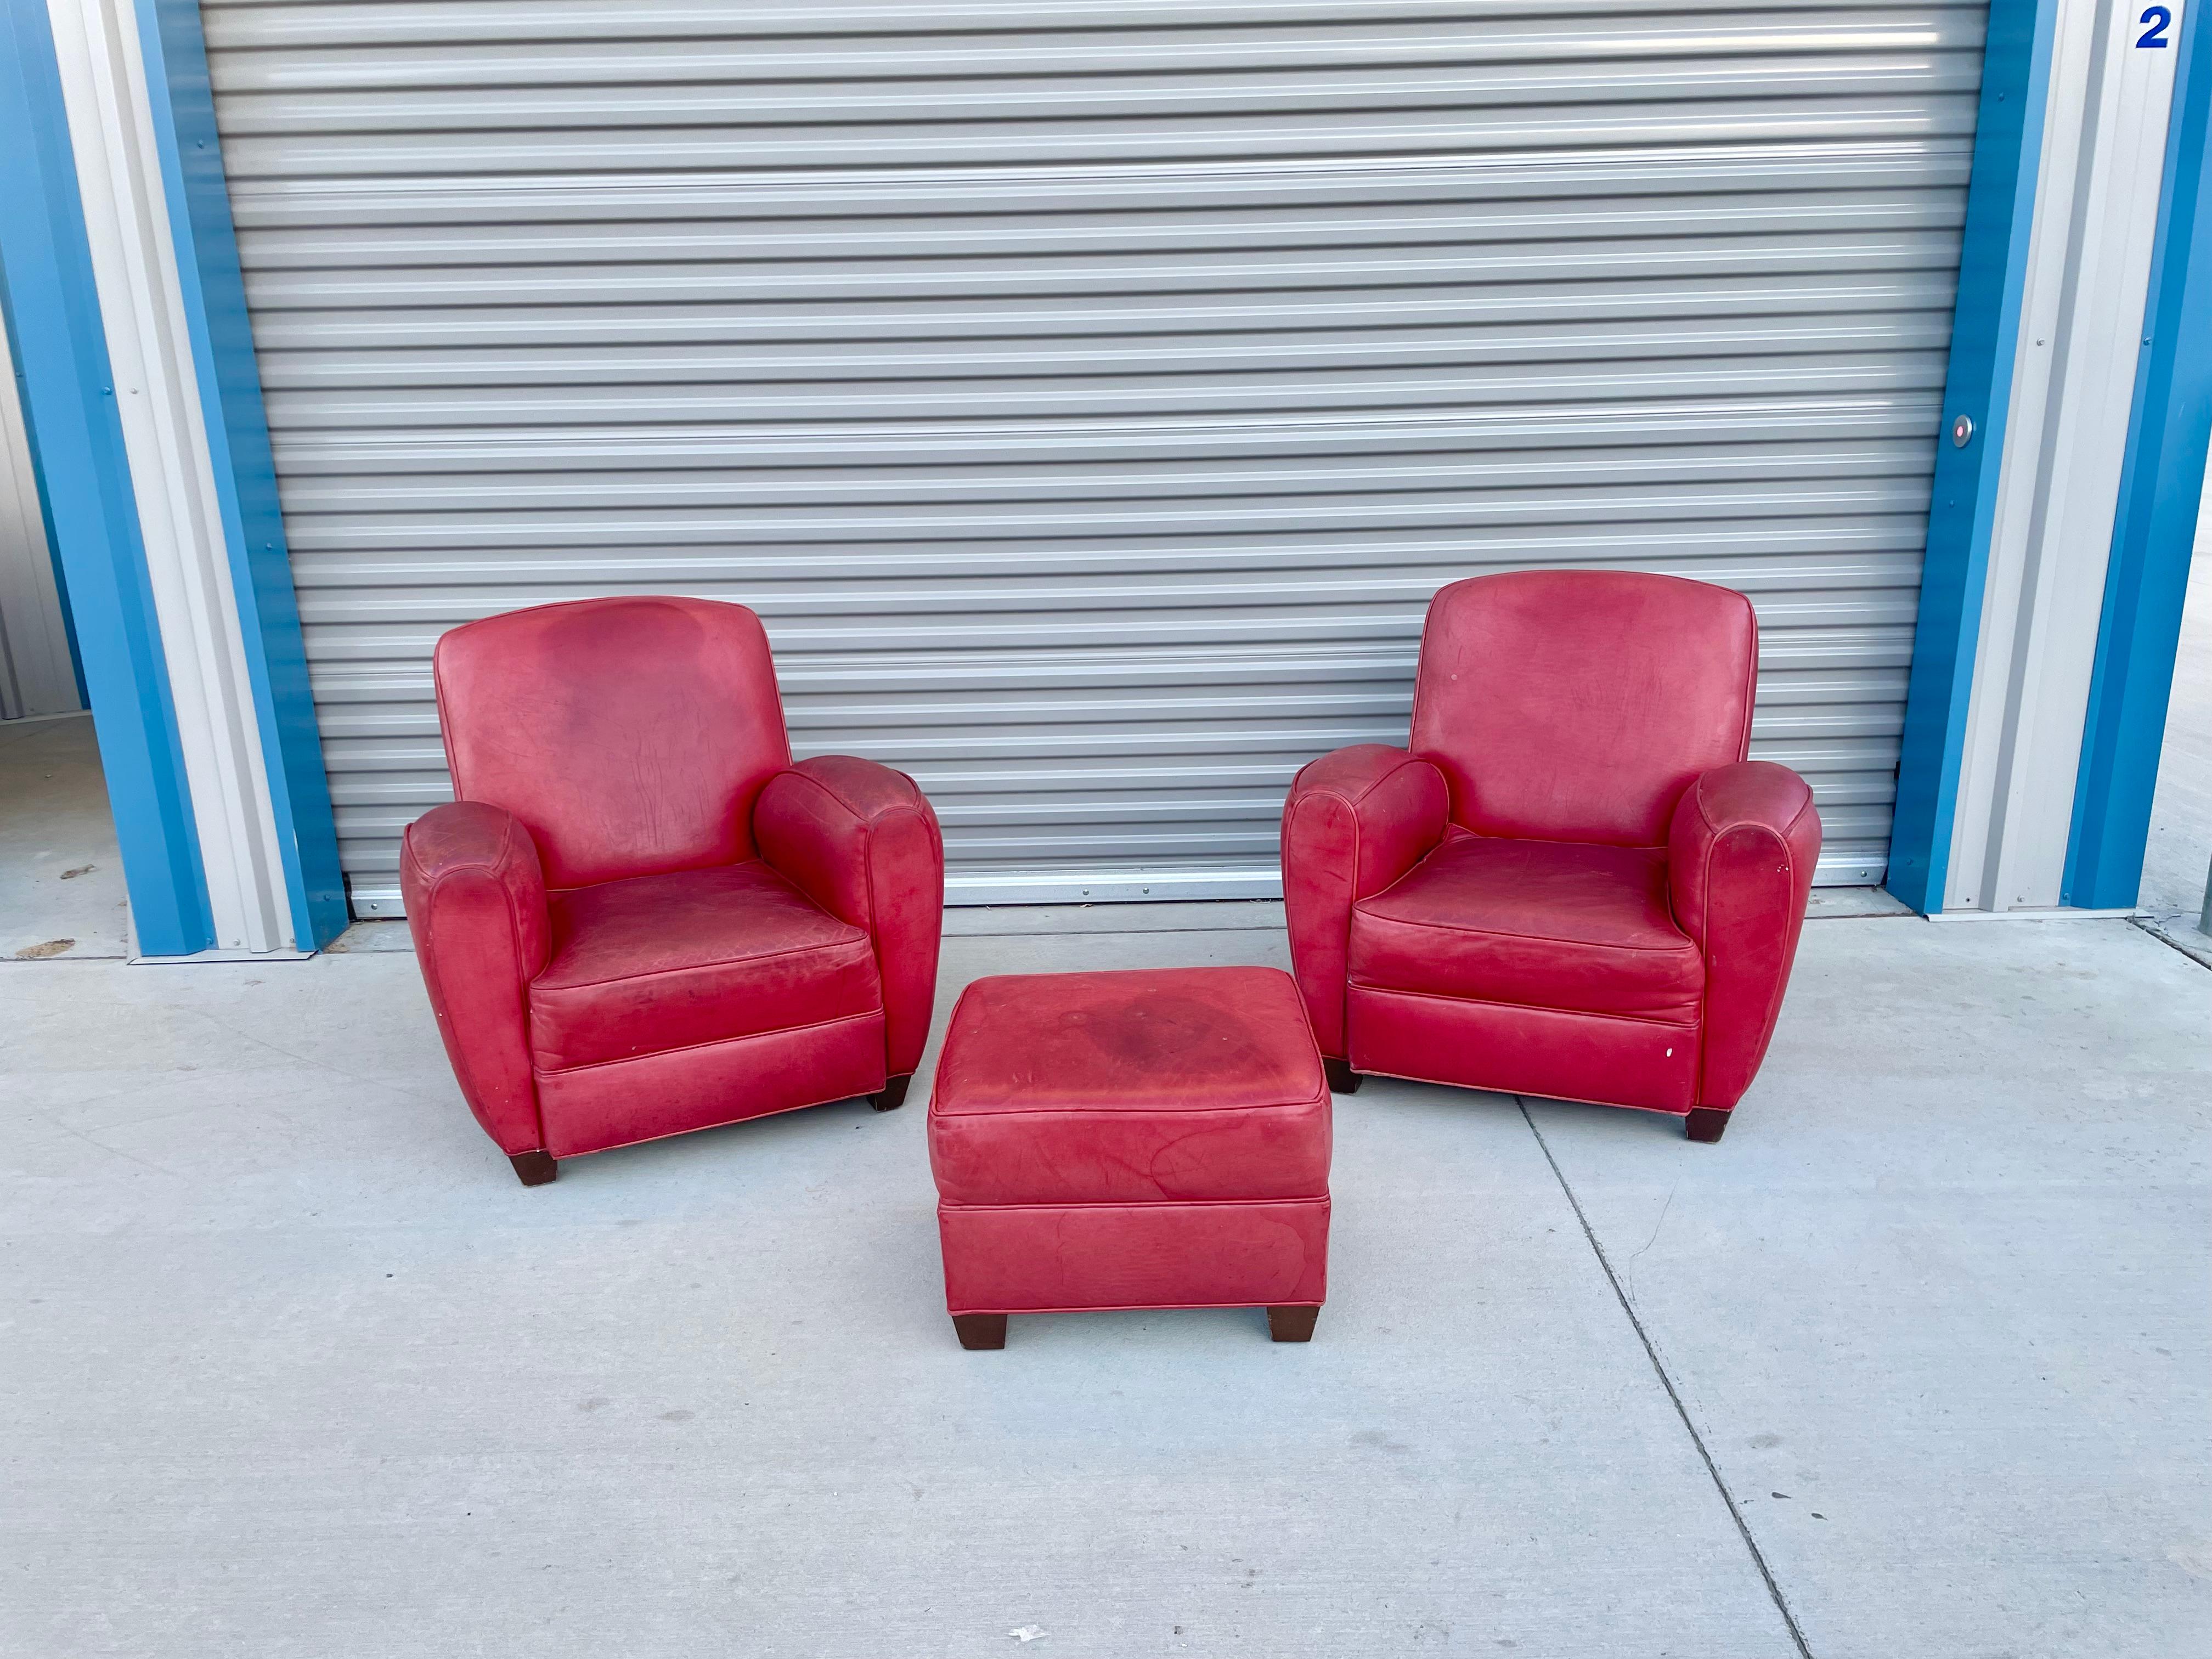 Beautiful vintage leather chairs & ottoman manufactured in the United States circa 1960s. This set retains its original red leather in nice vintage condition with only minor signs of wear, but still gives a great distinctive design for their era.